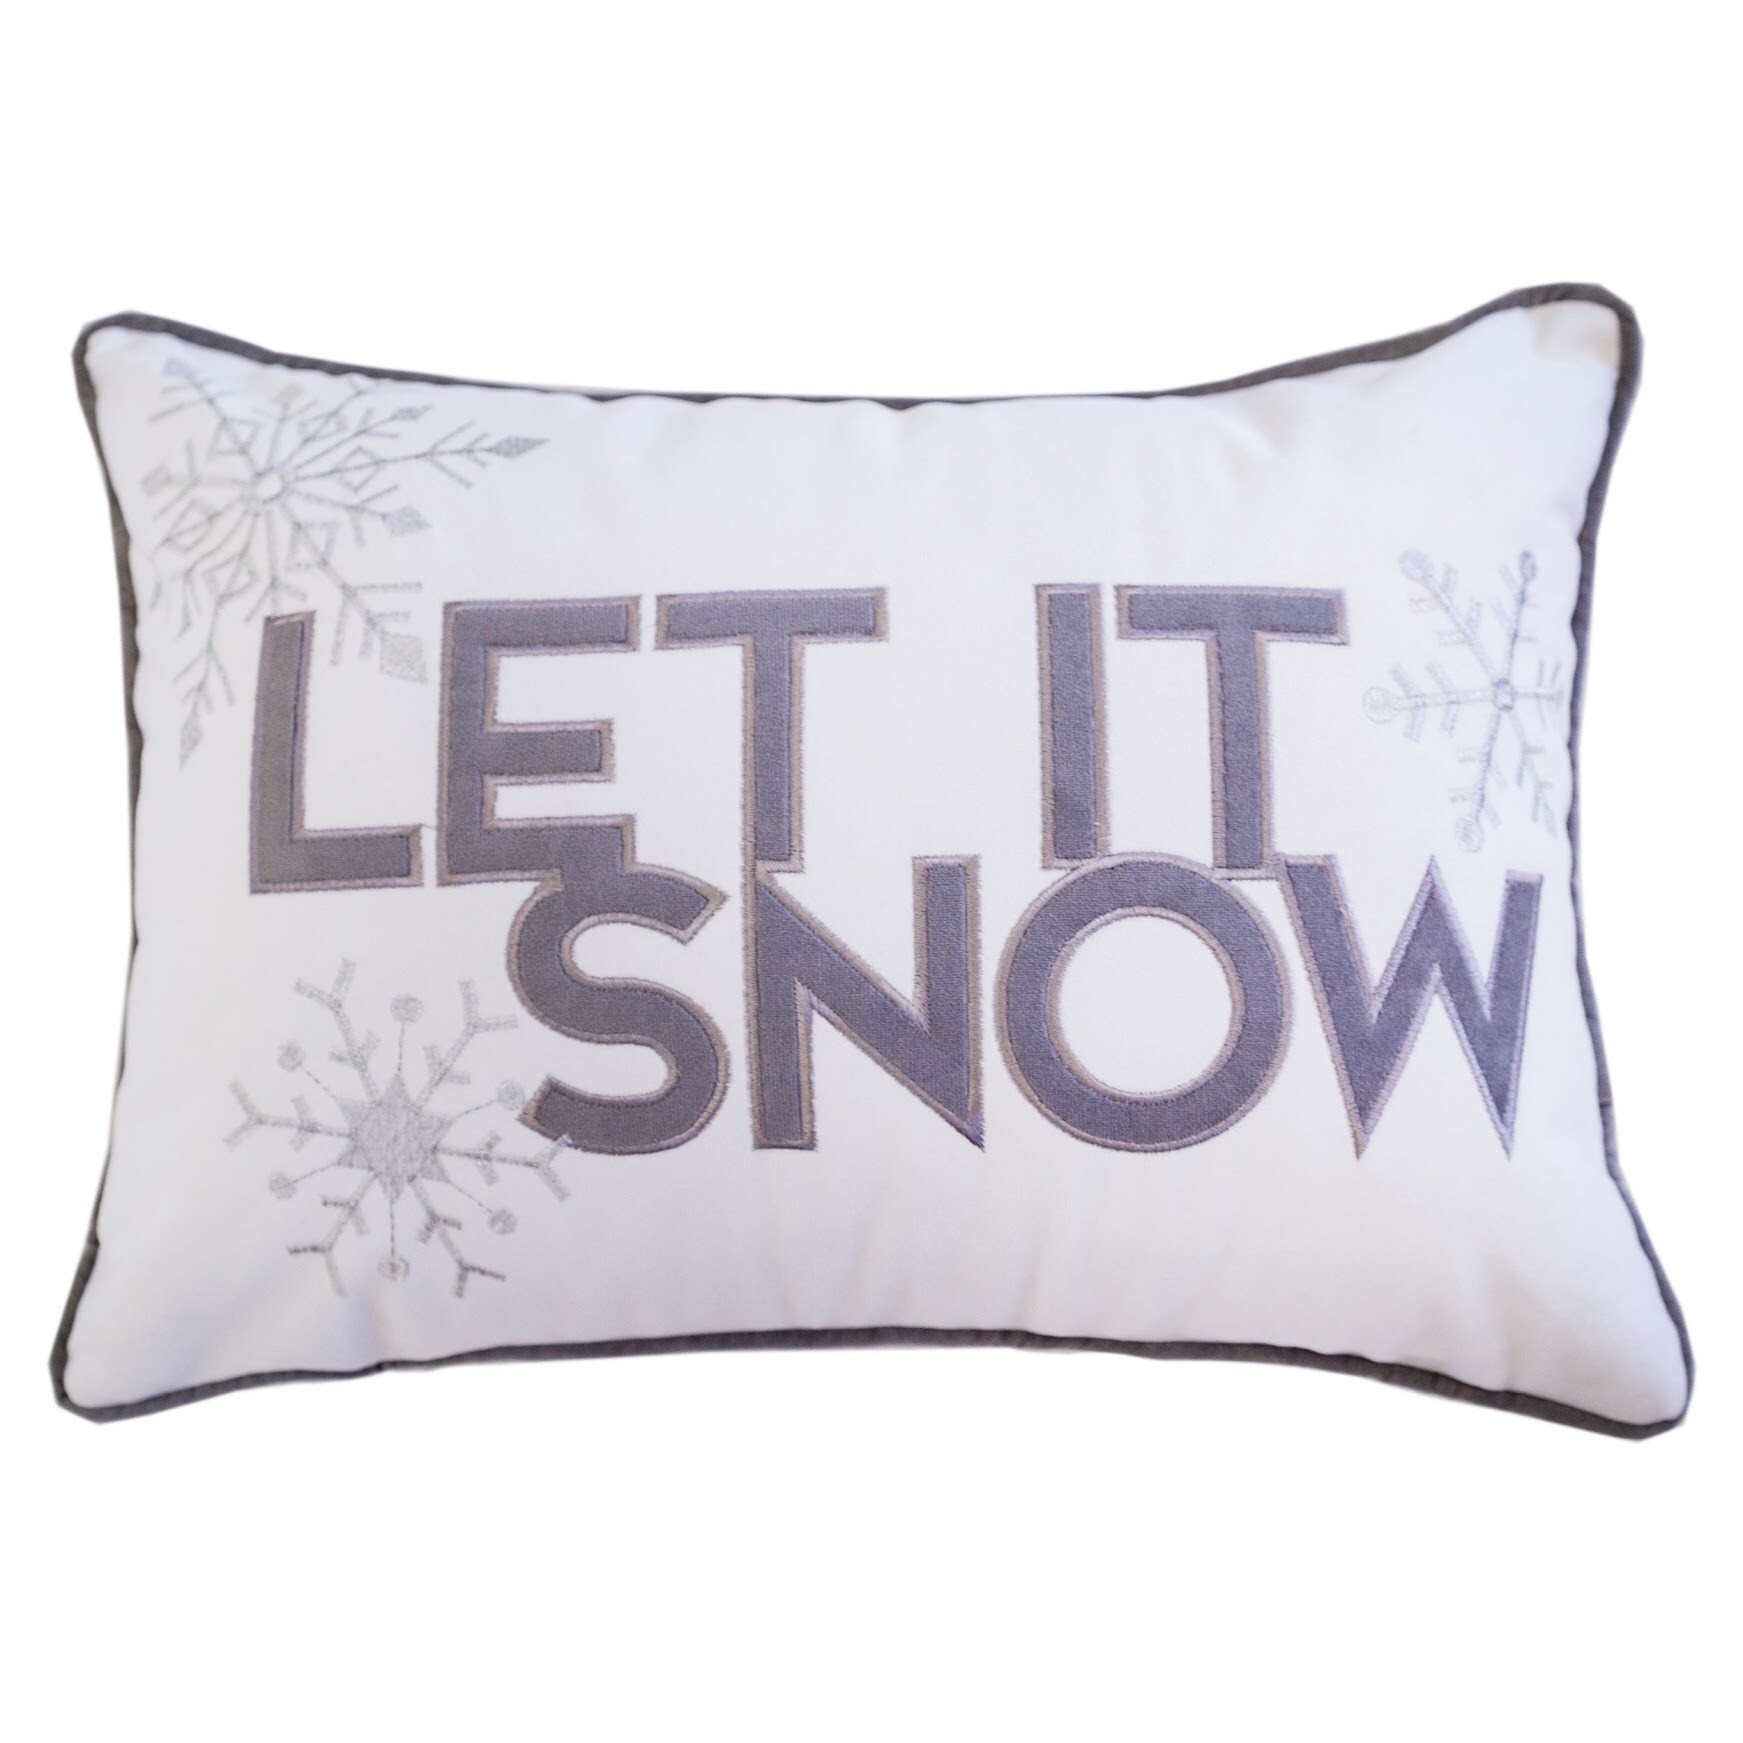 https://ak1.ostkcdn.com/images/products/is/images/direct/22938b0ba12a73a3a3ab235dd72855585e3c0ab7/Homey-Cozy-Embroidery-Christmas-Holiday-Throw-Pillow-Cover-%26-Insert.jpg